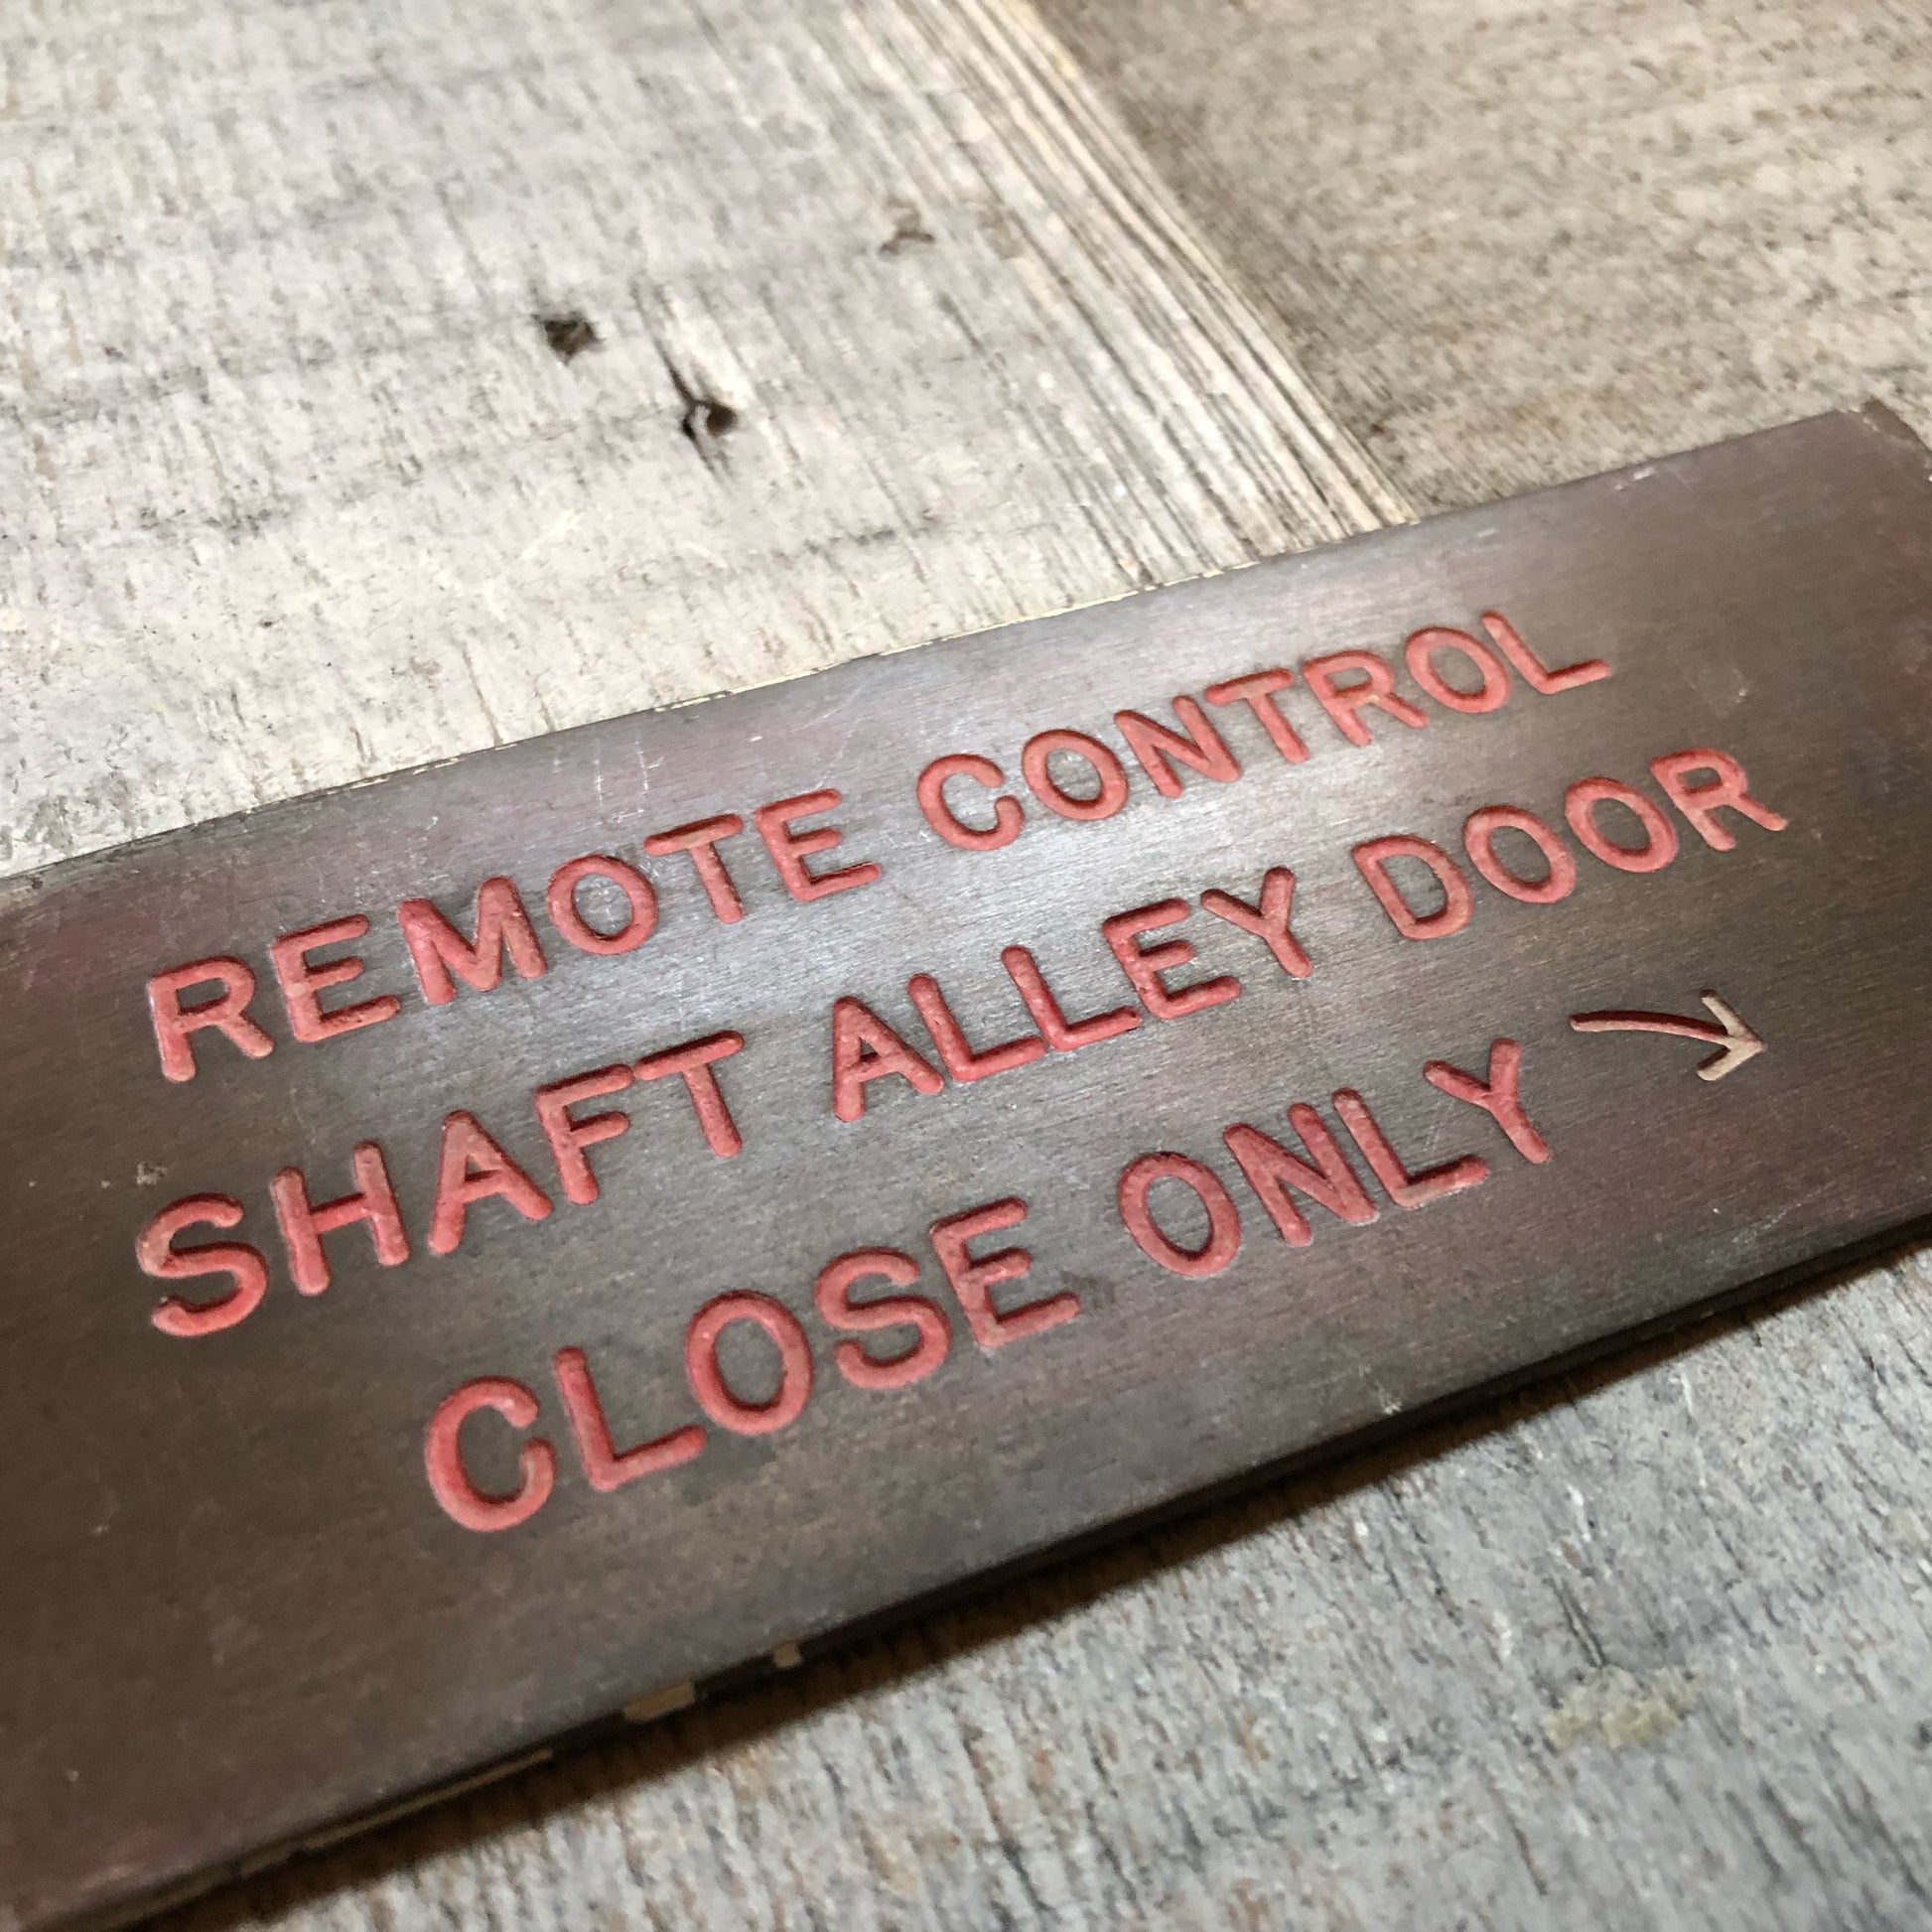 Remote Control Shaft Alley Door plate - Annapolis Maritime Antiques